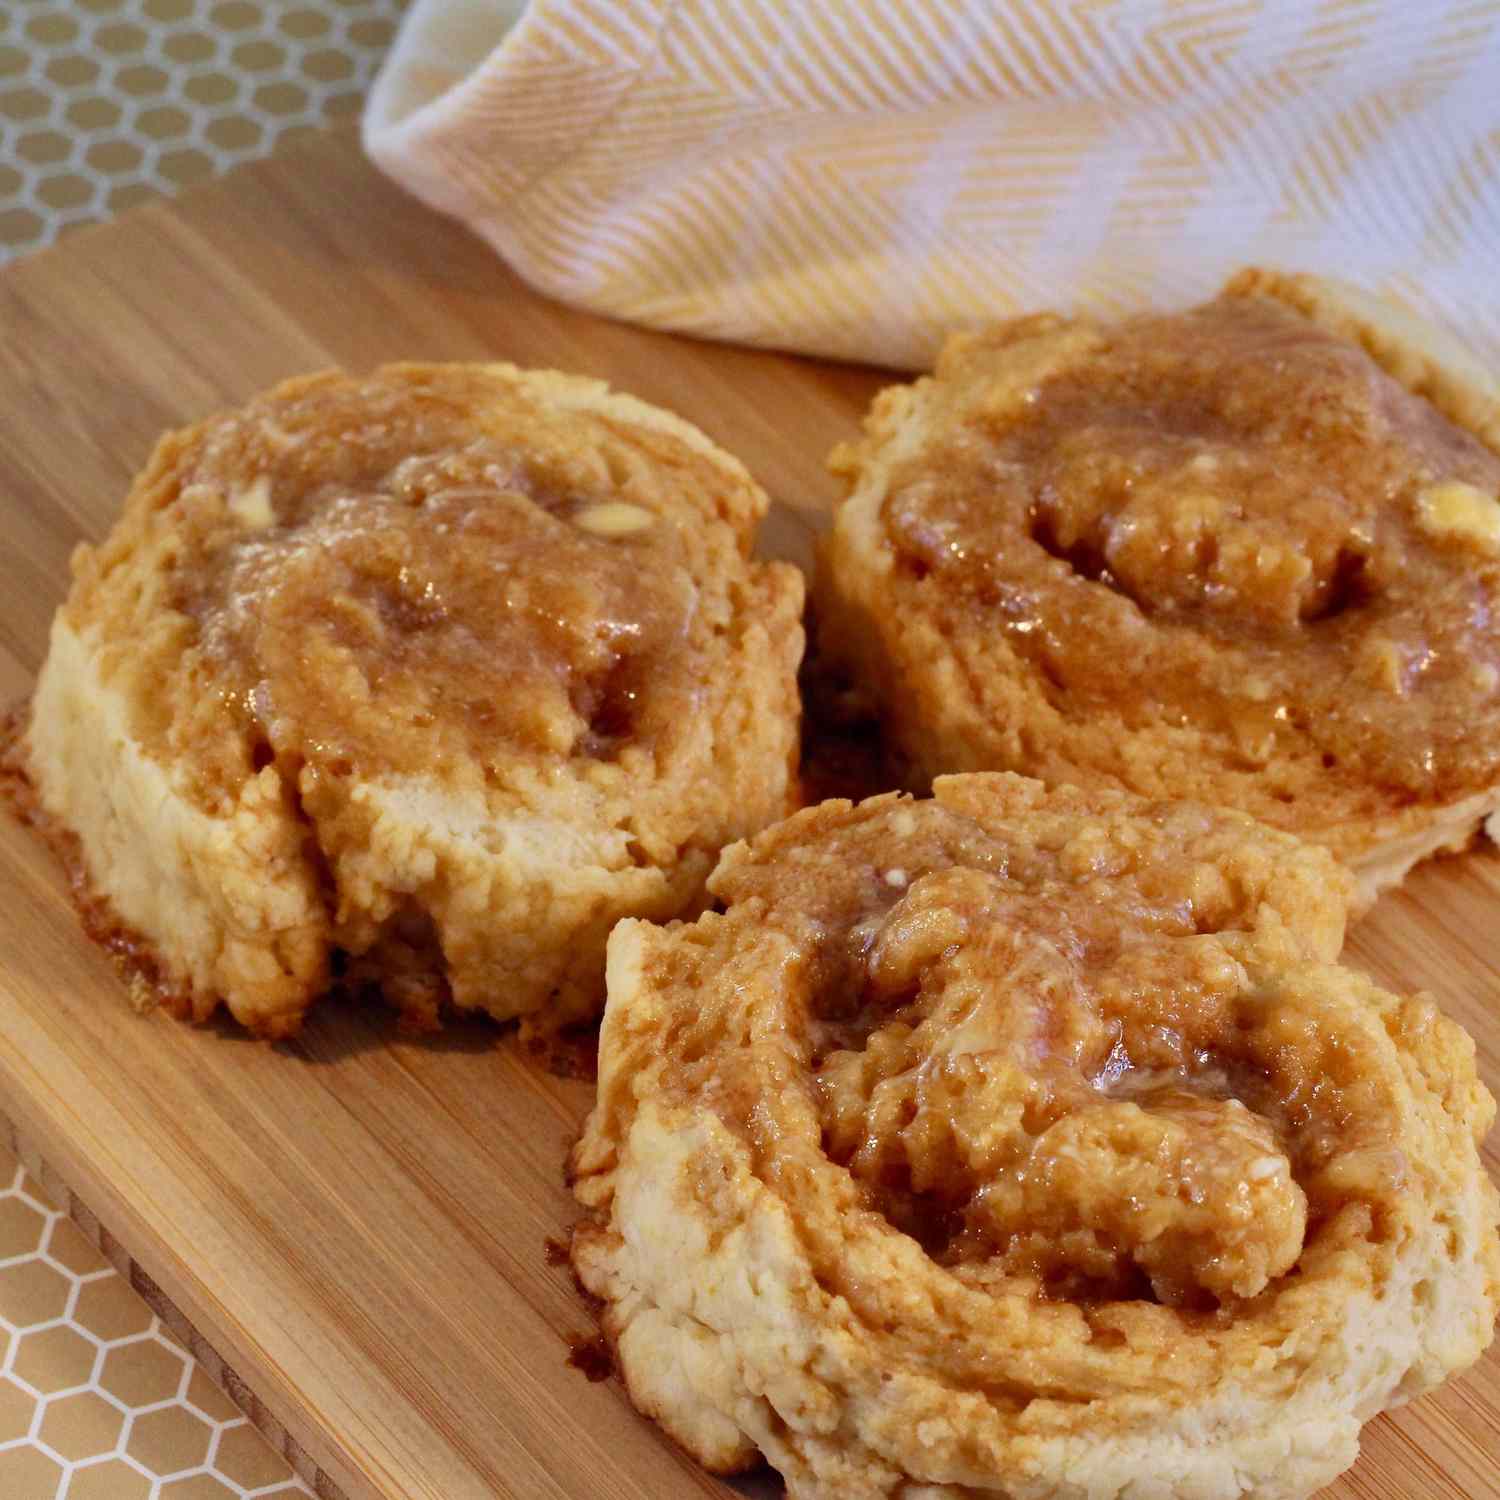 Honey Butter Biscuits on a wooden cutting board